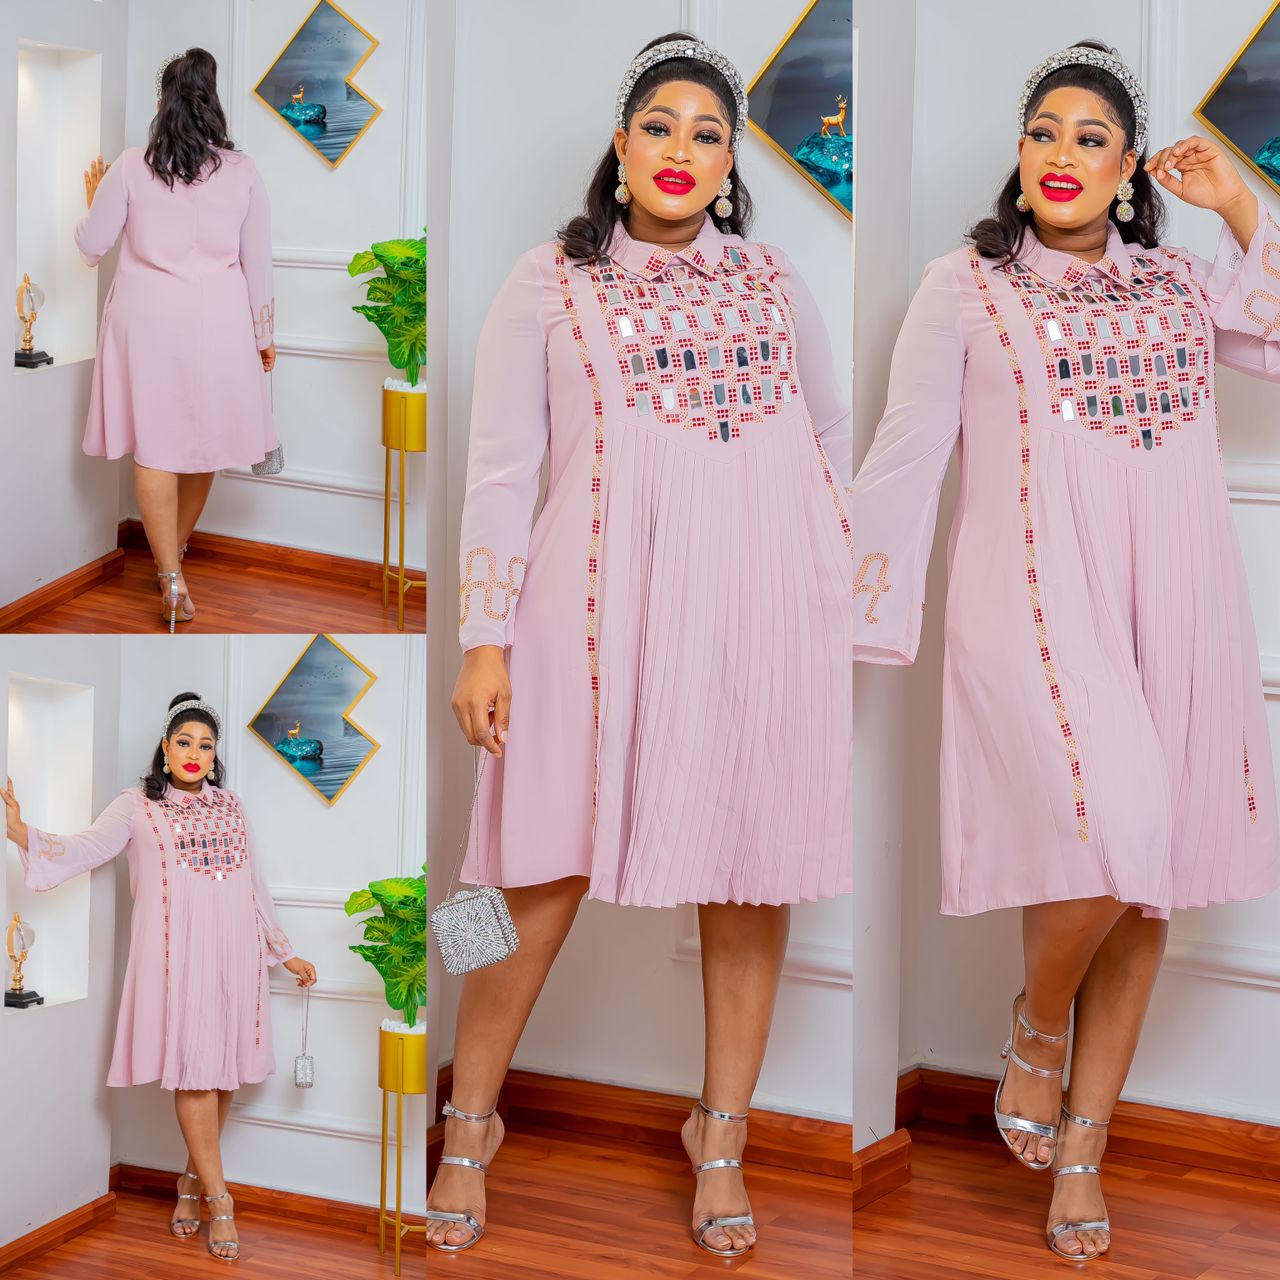 Medium Length Long Sleeve Dress with Color Patterns